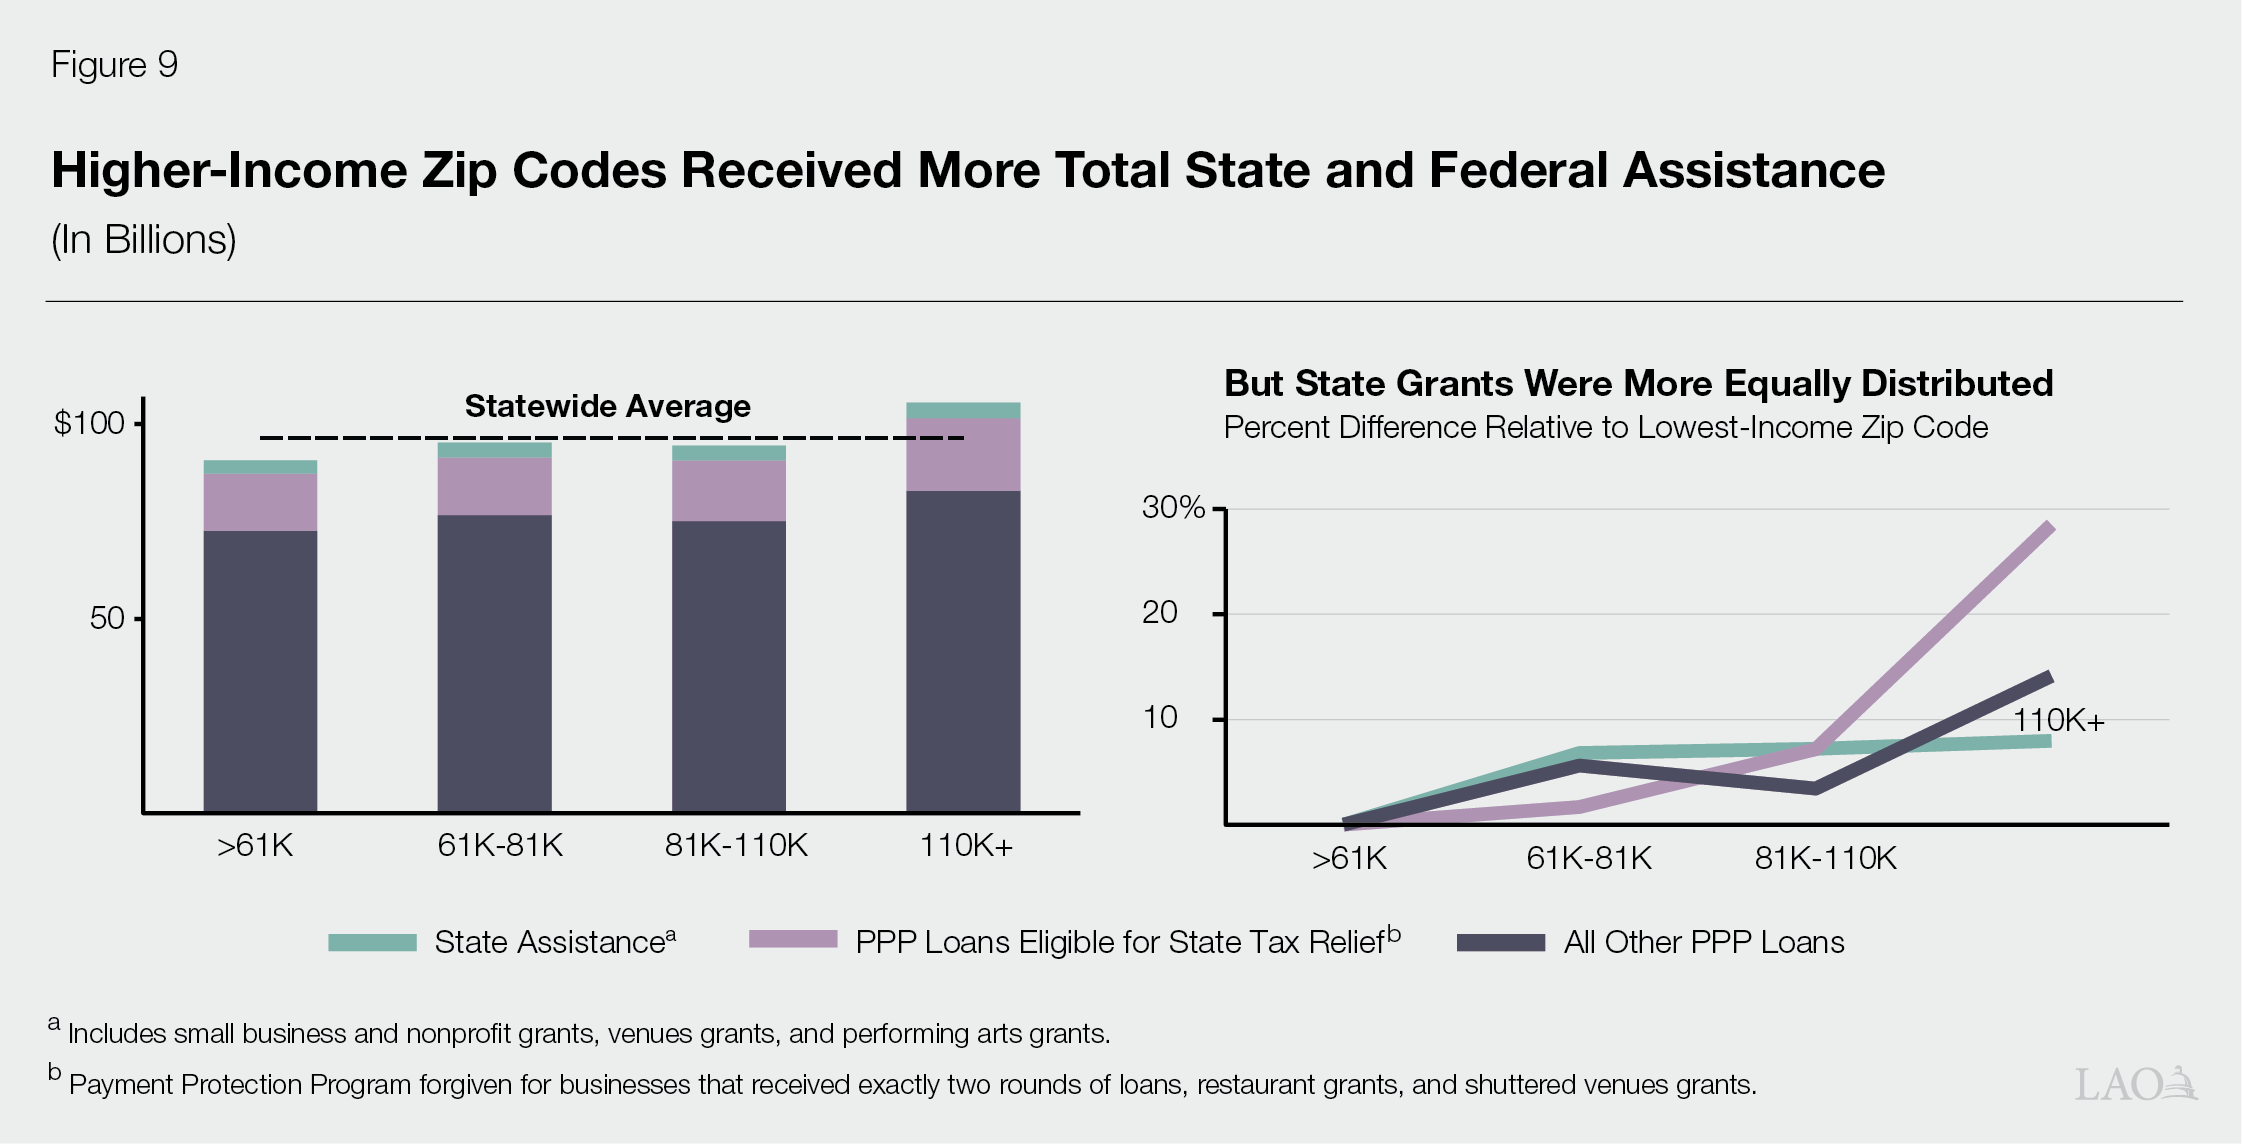 Figure 9 - Higher Income Zip Codes Received More Total STate and Federal Assistance